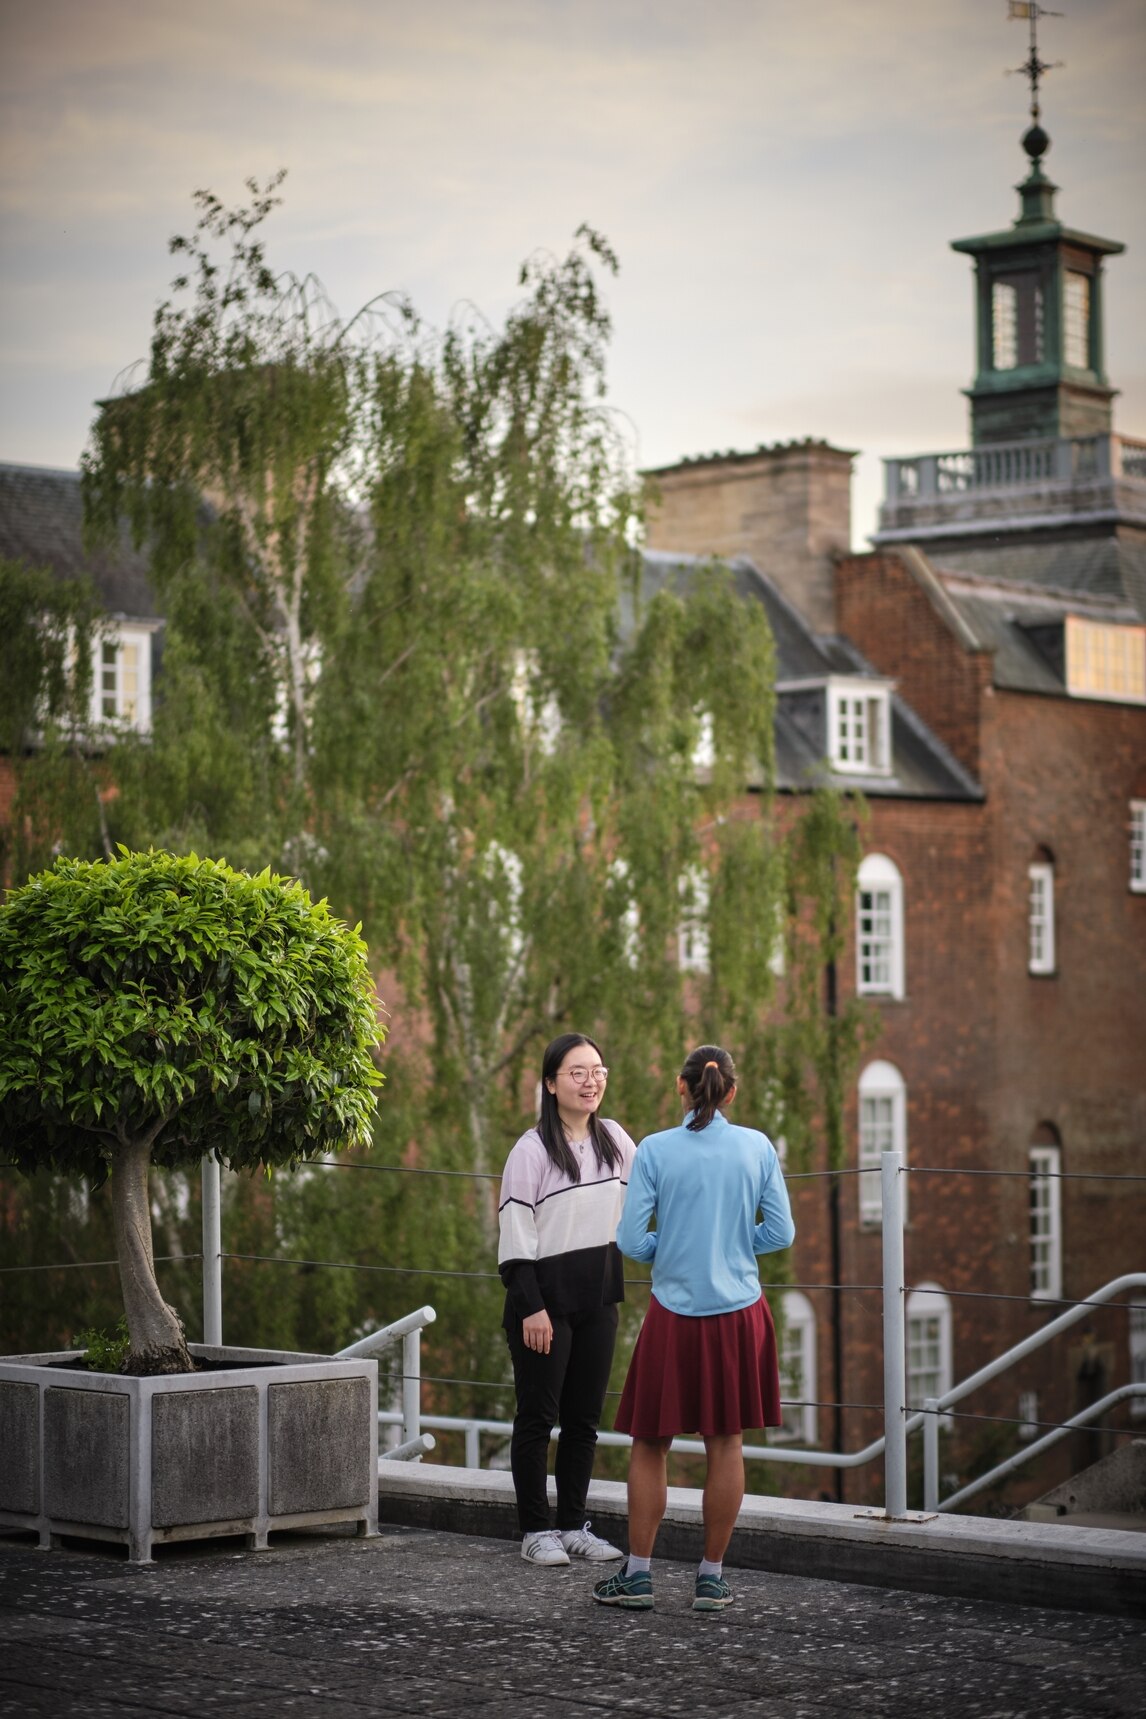 Two females chatting. Red brick building in background